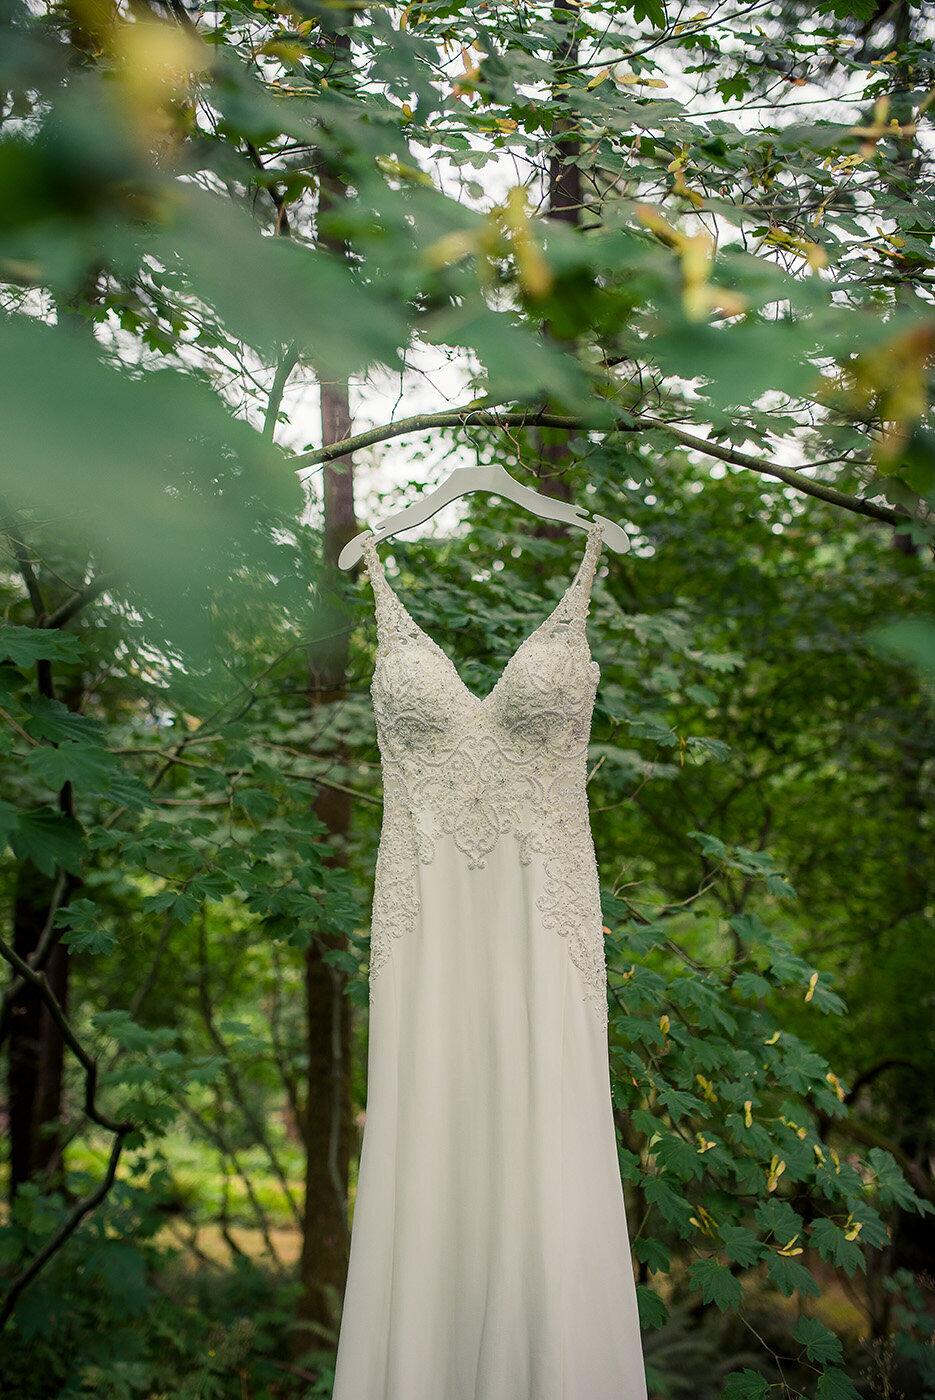 wedding gown hanging in tree